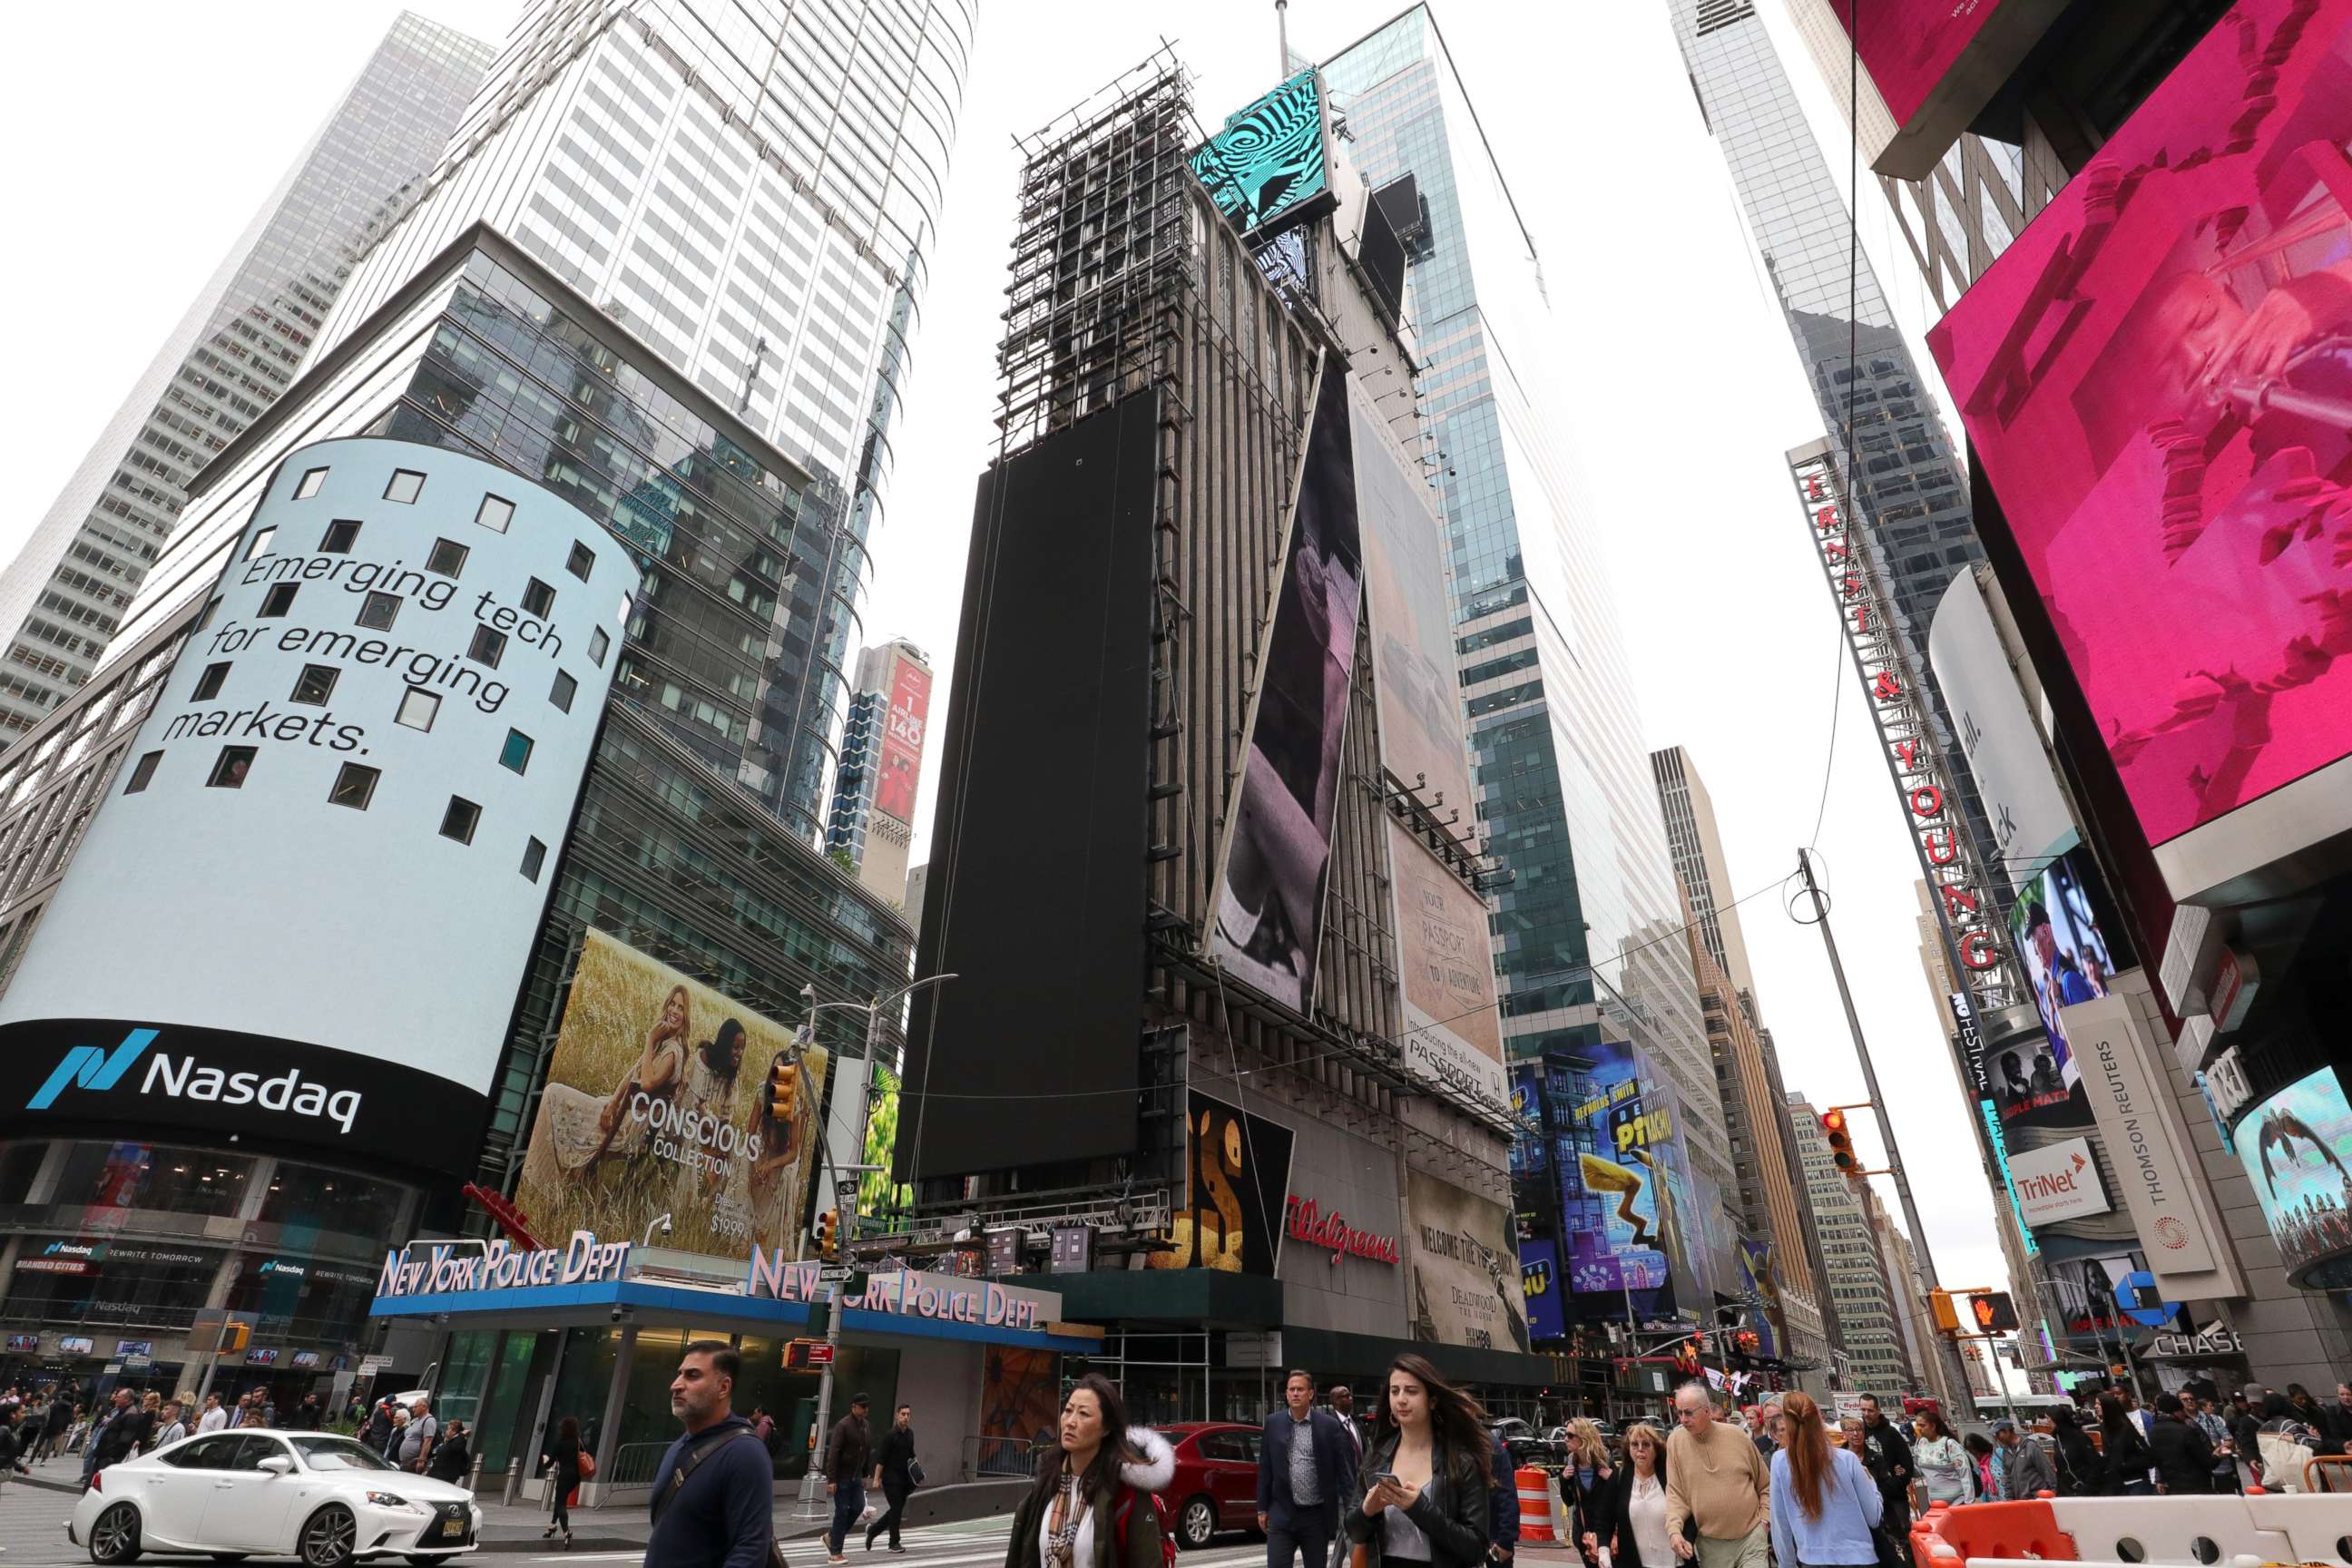 PHOTO: A new advertising board is installed on One Times Square on May 9, 2019 in New York City.